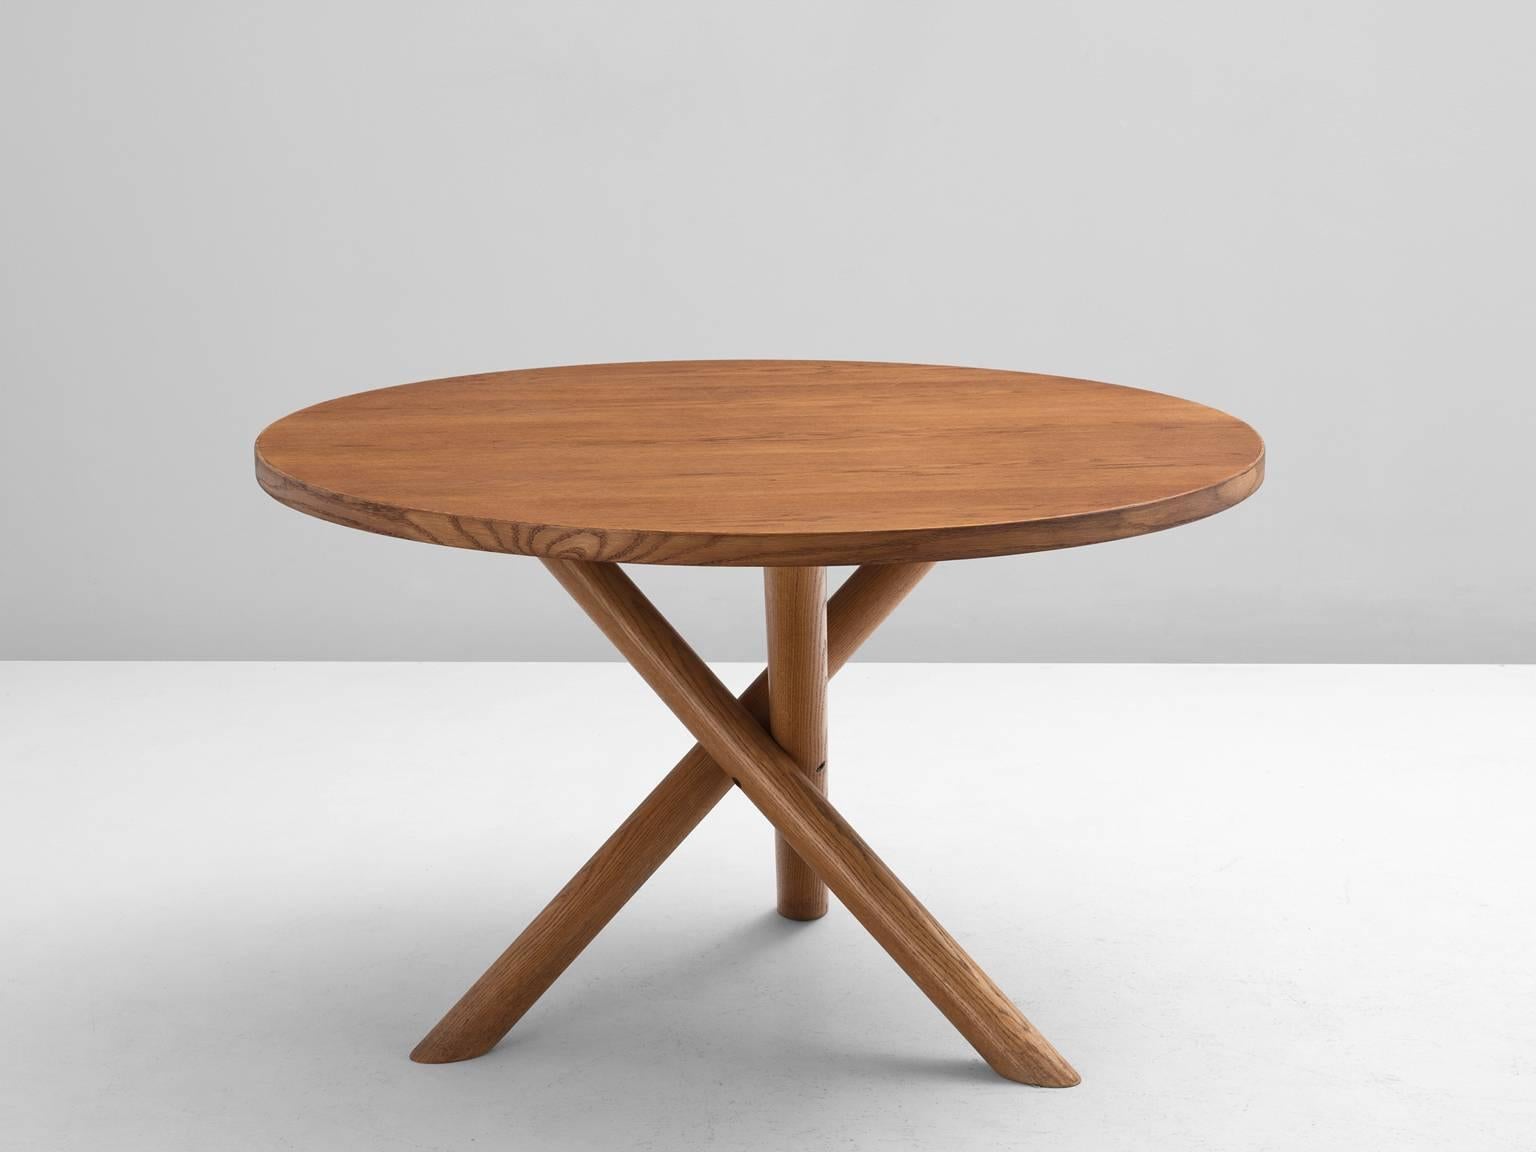 Dining table in pine by Martin Visser for t Spectrum, the Netherlands, 1960s.

Round dining table with tripod base. This small dining table has an interesting base, which reminds of the 'Micado' game. Three legs are combined into a solid